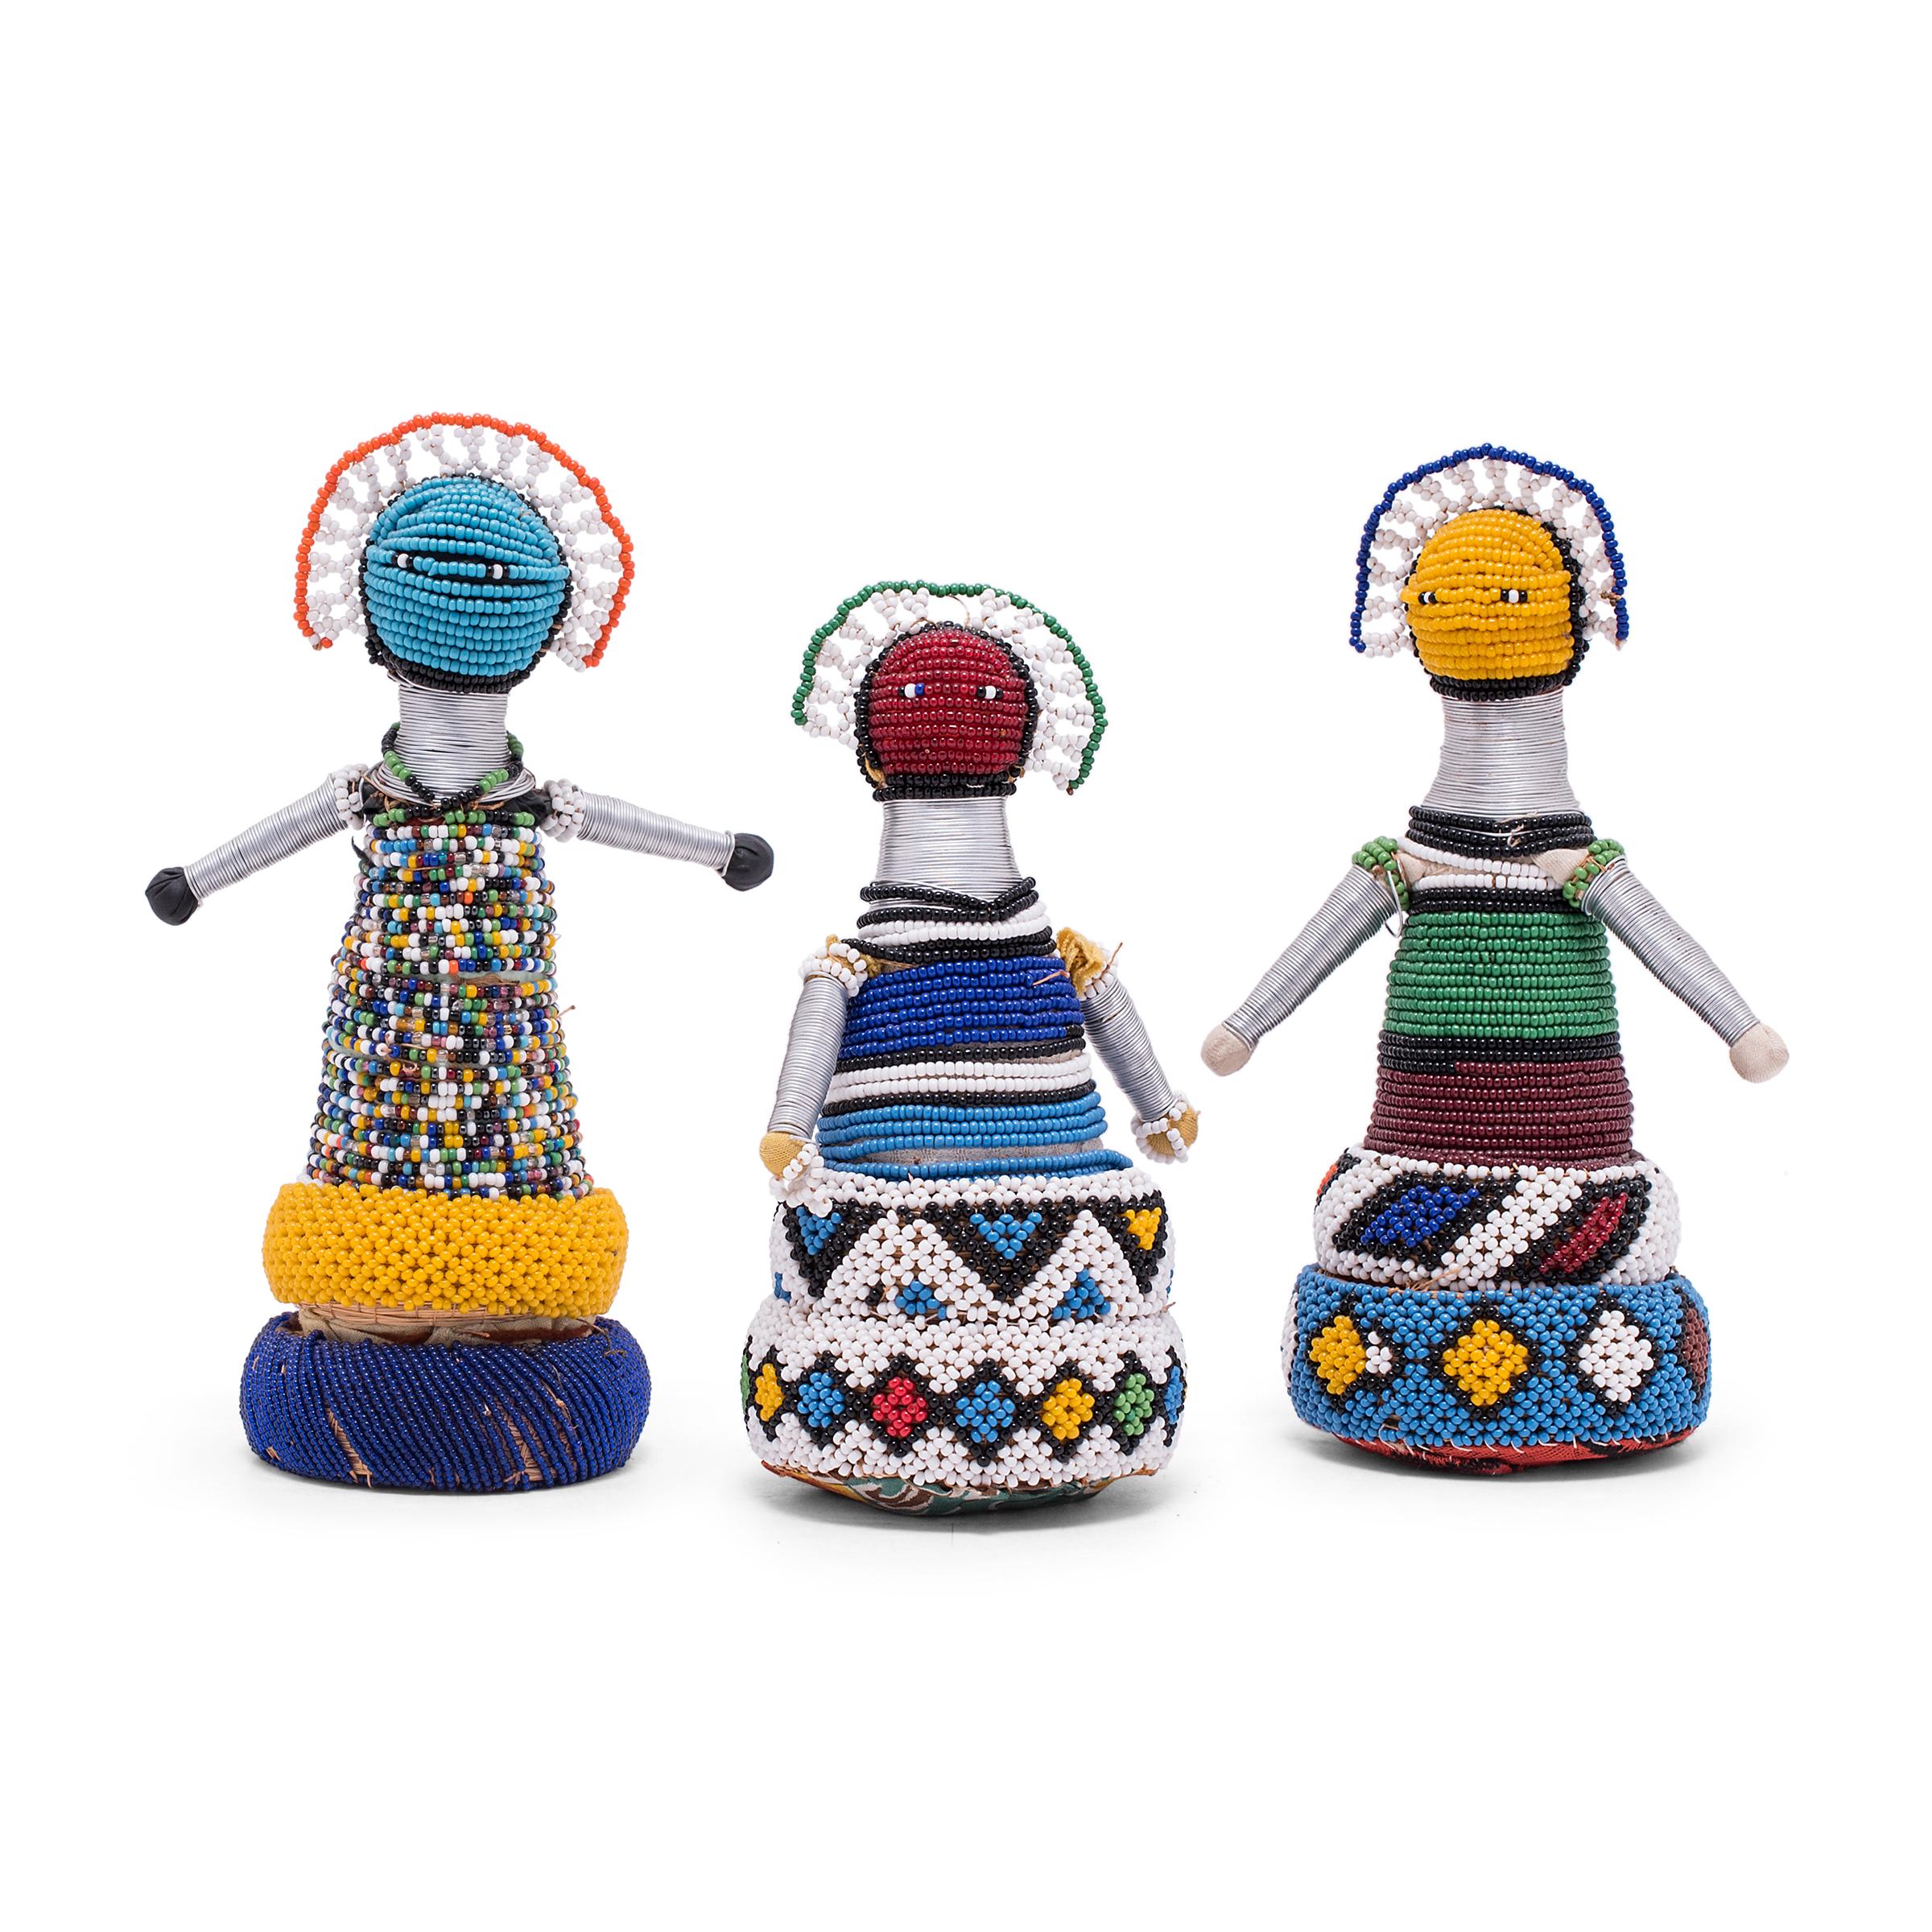 South African Beaded Ndebele Fertility Doll For Sale